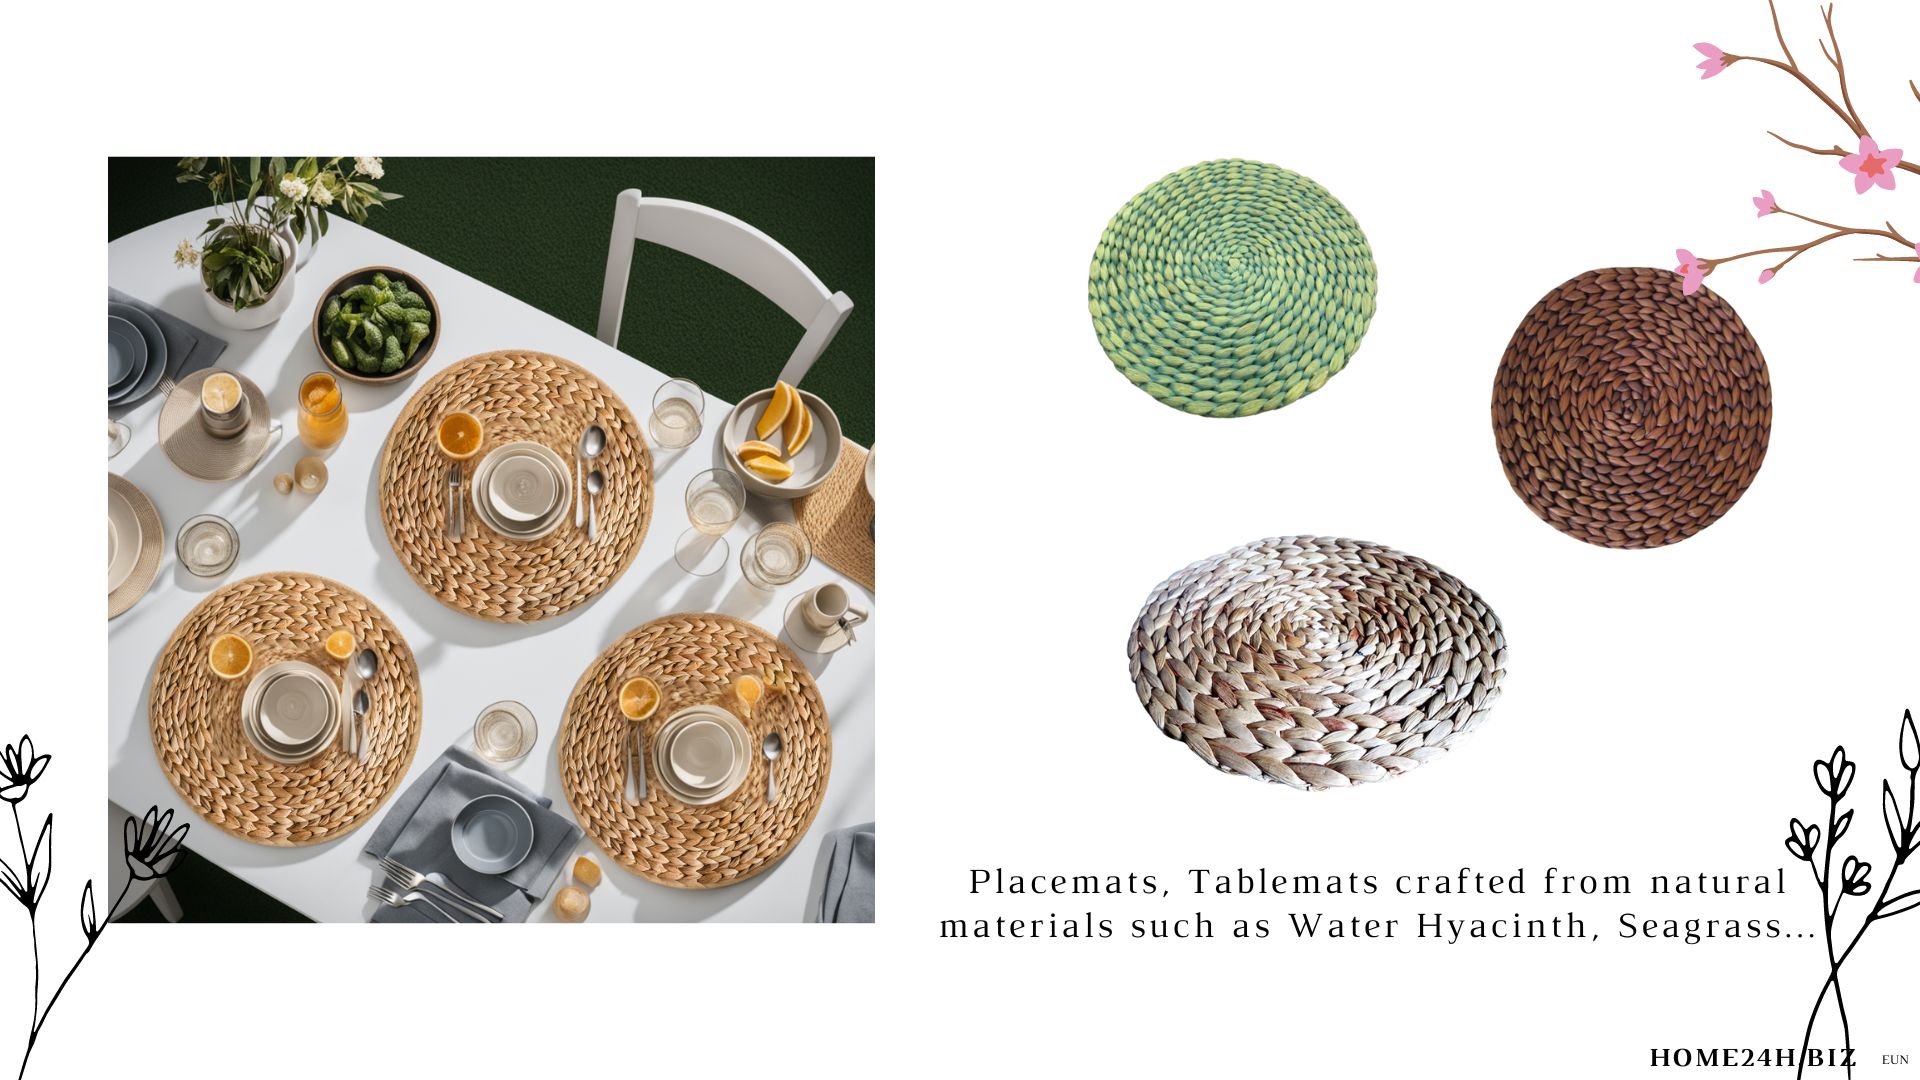 Placemats, Tablemats Crafted From Natural Materials Enhance Your Table Decor